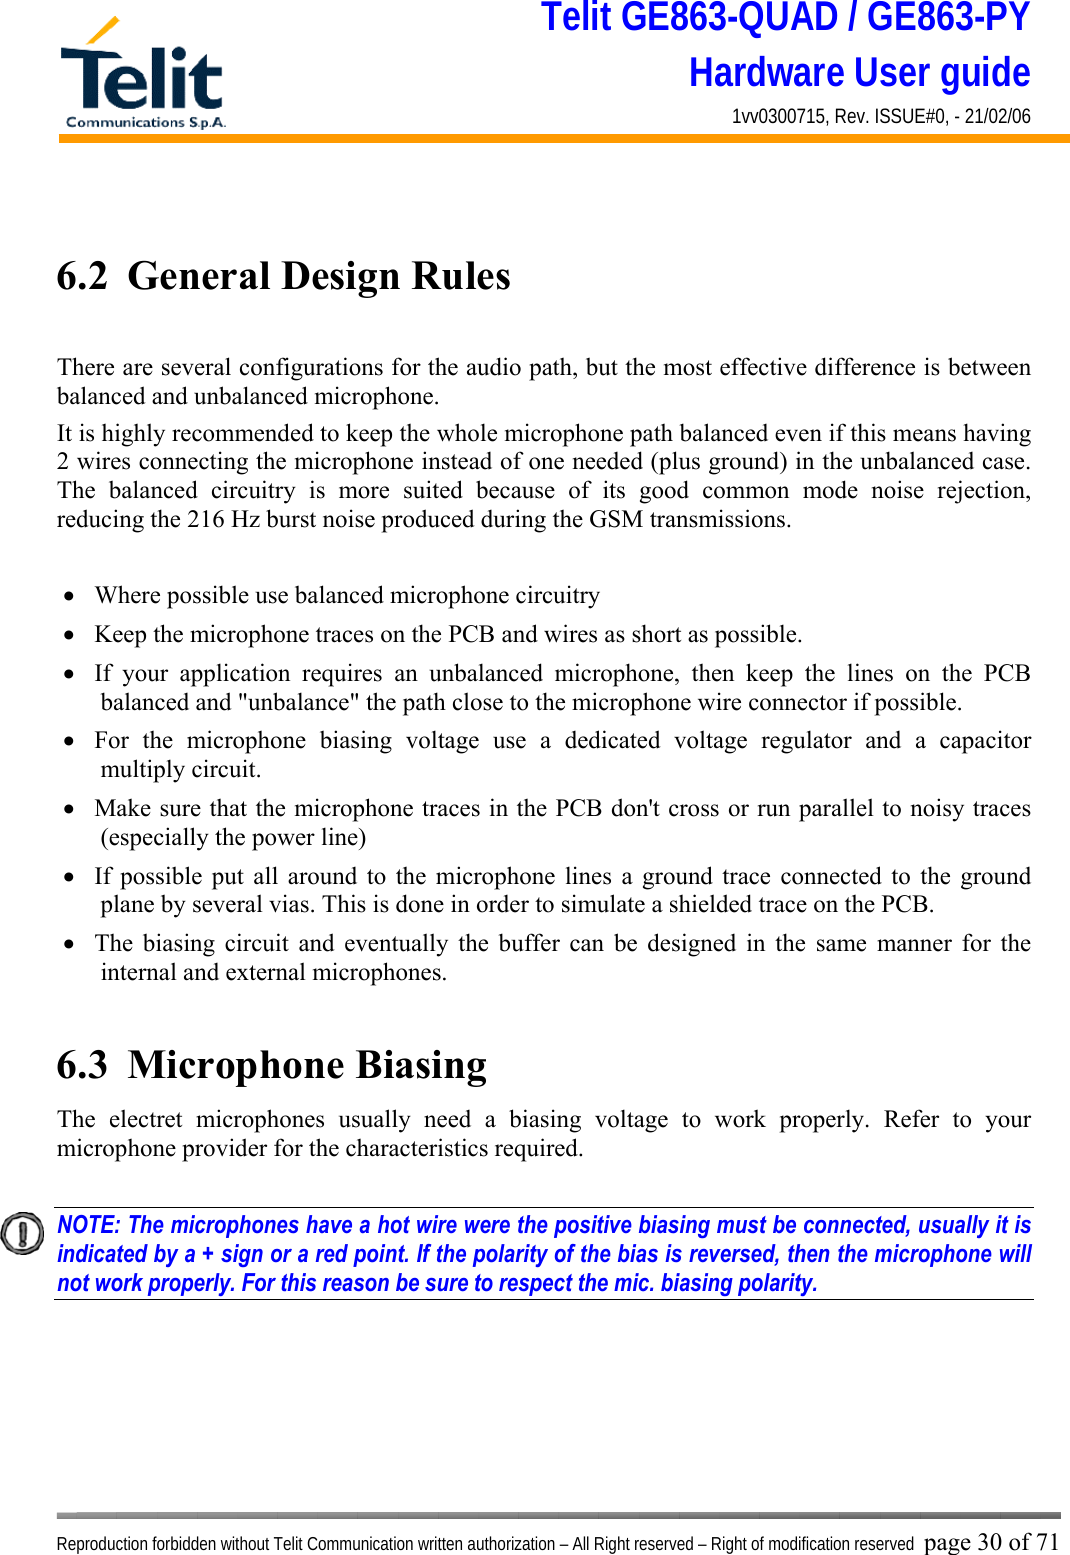 Telit GE863-QUAD / GE863-PY Hardware User guide 1vv0300715, Rev. ISSUE#0, - 21/02/06    Reproduction forbidden without Telit Communication written authorization – All Right reserved – Right of modification reserved page 30 of 71  6.2  General Design Rules  There are several configurations for the audio path, but the most effective difference is between balanced and unbalanced microphone. It is highly recommended to keep the whole microphone path balanced even if this means having 2 wires connecting the microphone instead of one needed (plus ground) in the unbalanced case. The balanced circuitry is more suited because of its good common mode noise rejection, reducing the 216 Hz burst noise produced during the GSM transmissions.  •  Where possible use balanced microphone circuitry •  Keep the microphone traces on the PCB and wires as short as possible. •  If your application requires an unbalanced microphone, then keep the lines on the PCB balanced and &quot;unbalance&quot; the path close to the microphone wire connector if possible. •  For the microphone biasing voltage use a dedicated voltage regulator and a capacitor multiply circuit. •  Make sure that the microphone traces in the PCB don&apos;t cross or run parallel to noisy traces (especially the power line)  •  If possible put all around to the microphone lines a ground trace connected to the ground plane by several vias. This is done in order to simulate a shielded trace on the PCB. •  The biasing circuit and eventually the buffer can be designed in the same manner for the internal and external microphones.  6.3  Microphone Biasing The electret microphones usually need a biasing voltage to work properly. Refer to your microphone provider for the characteristics required.  NOTE: The microphones have a hot wire were the positive biasing must be connected, usually it is indicated by a + sign or a red point. If the polarity of the bias is reversed, then the microphone will not work properly. For this reason be sure to respect the mic. biasing polarity.    